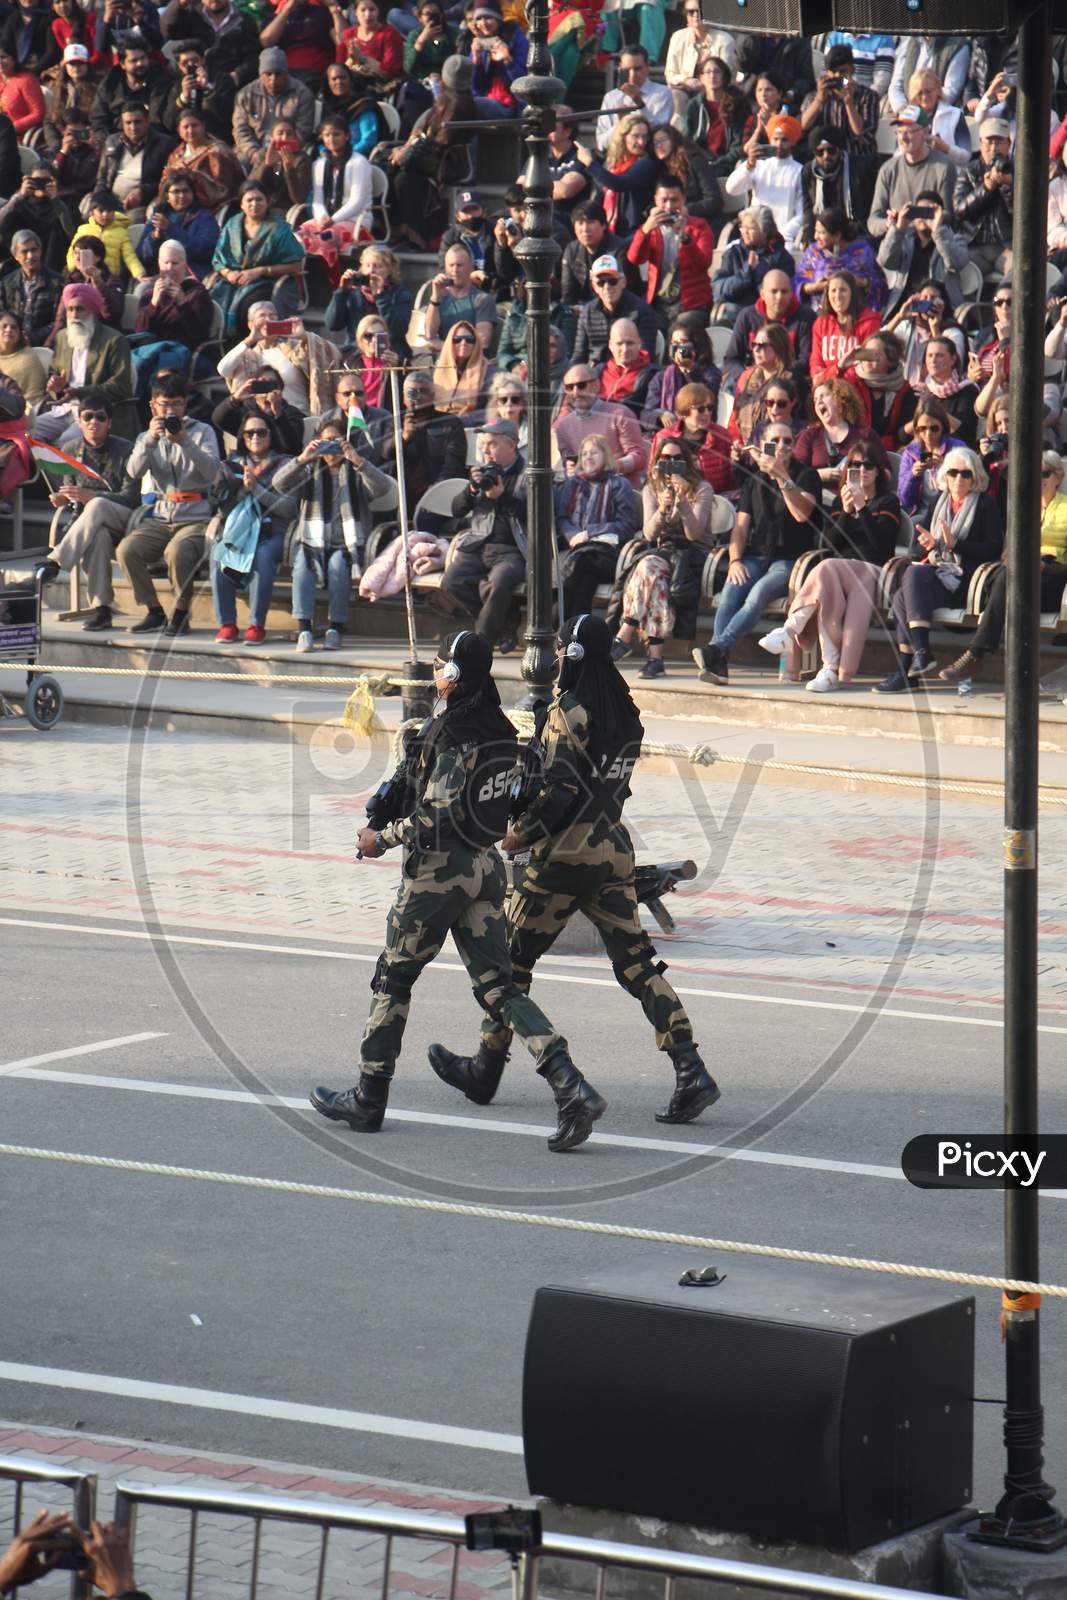 Indian crowd cheering and celebrating Border Security Force of Indian Army at Wagha Border, India. Amritsar, Punjab, India